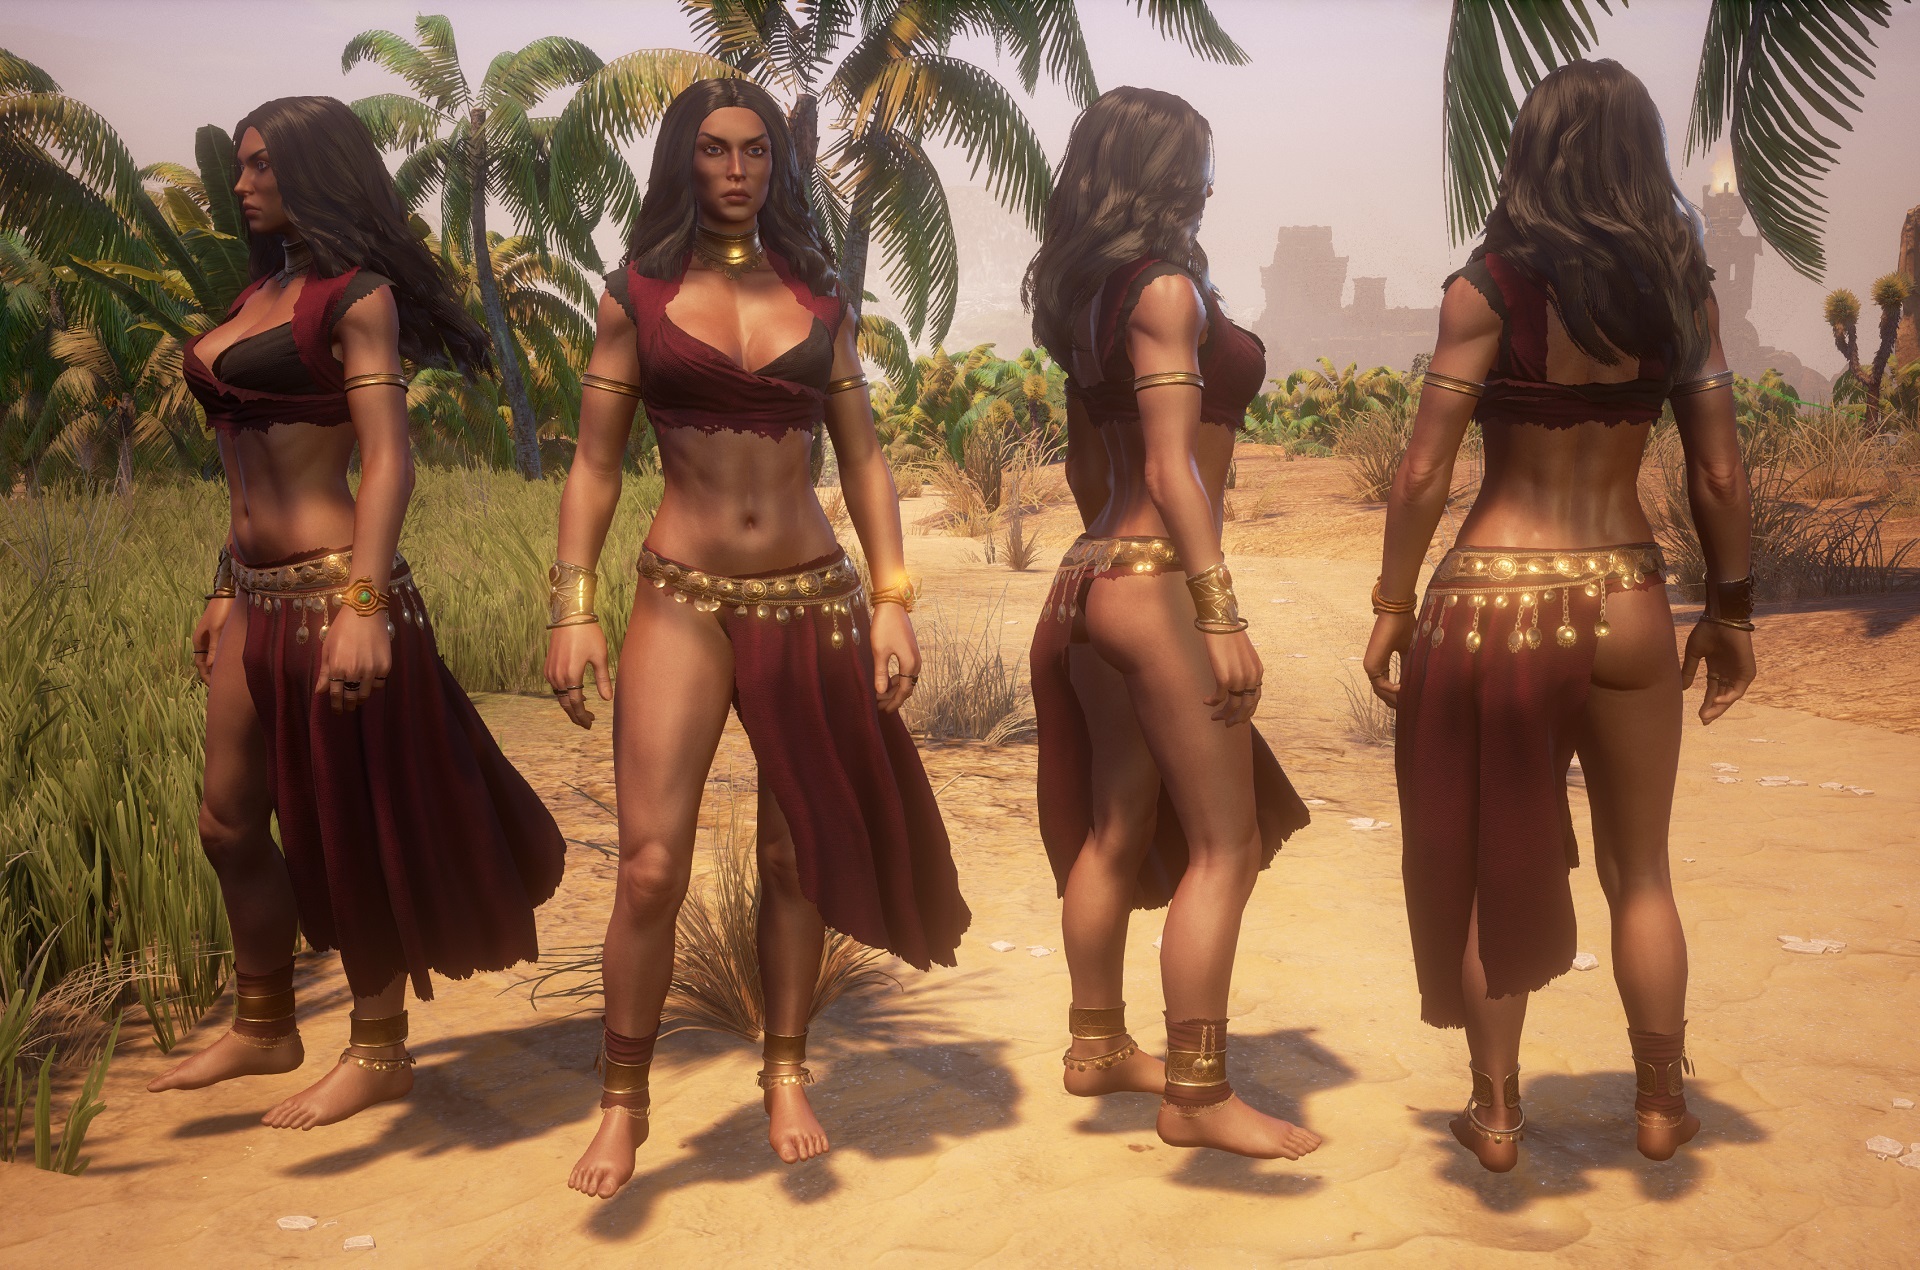 bill huxhold recommends conan exiles naked women pic